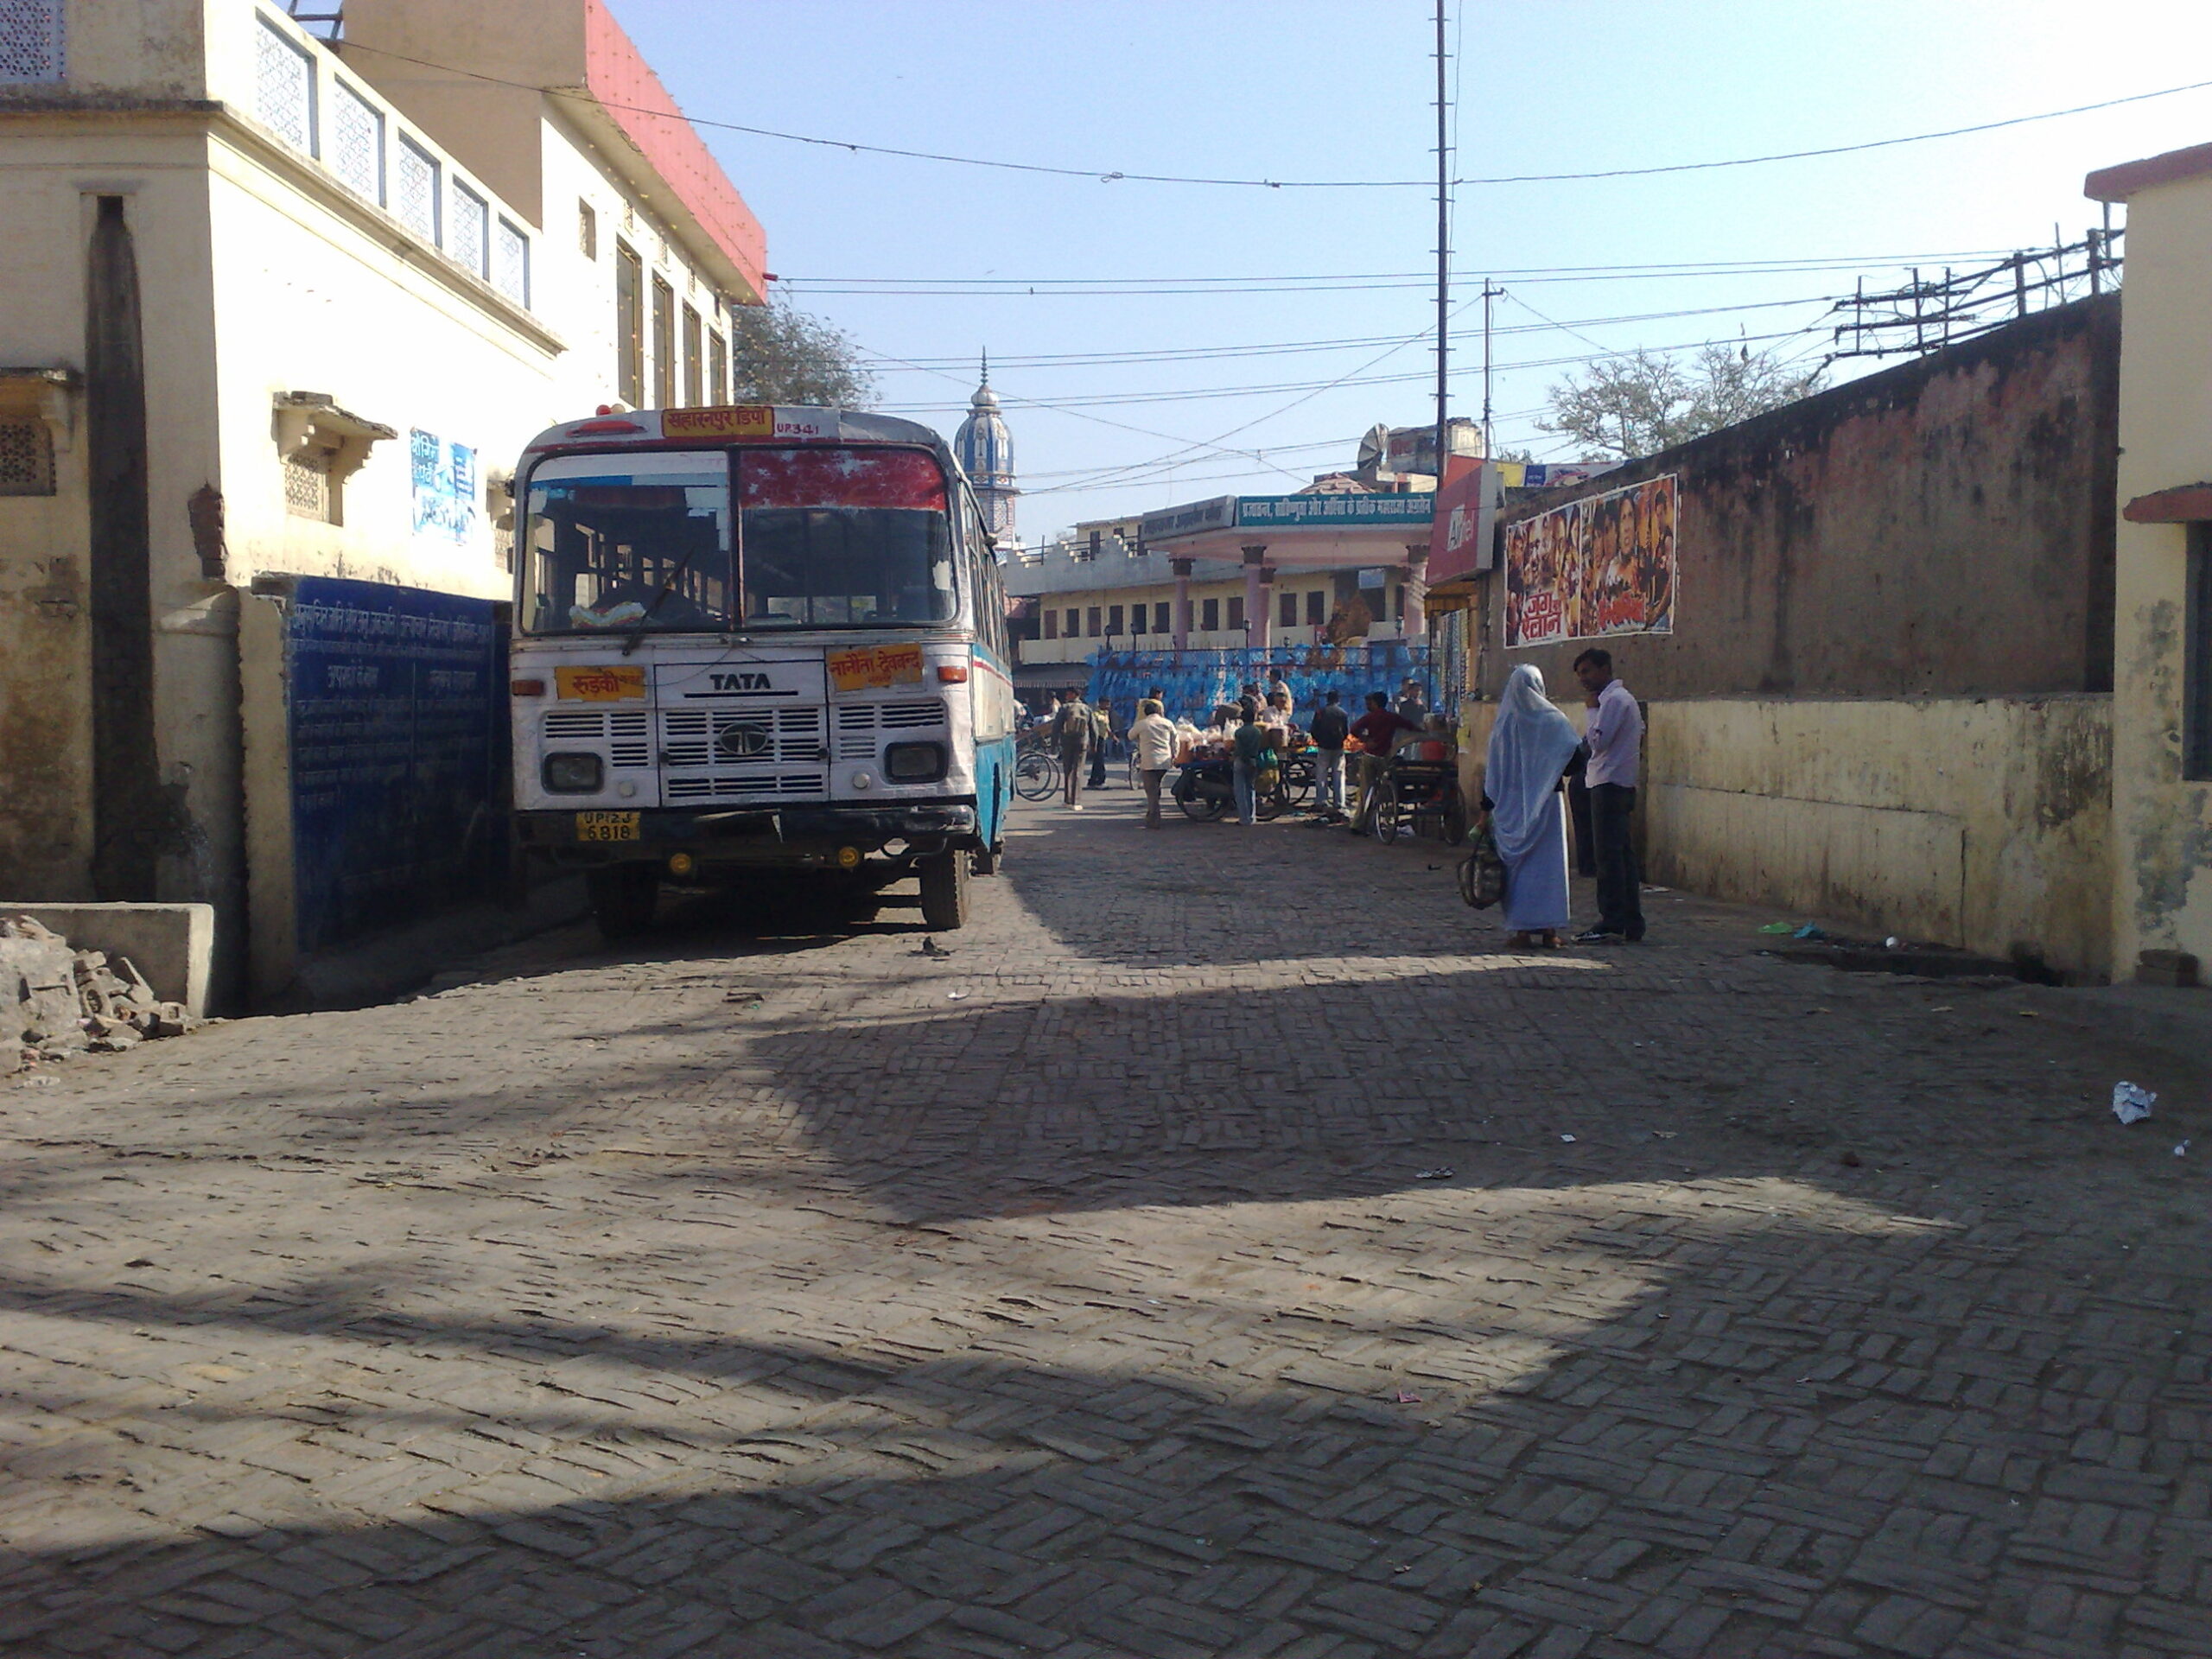 After Many Years Visited My Childhood City & Home : Saharanpur, India (Feb'09) 17